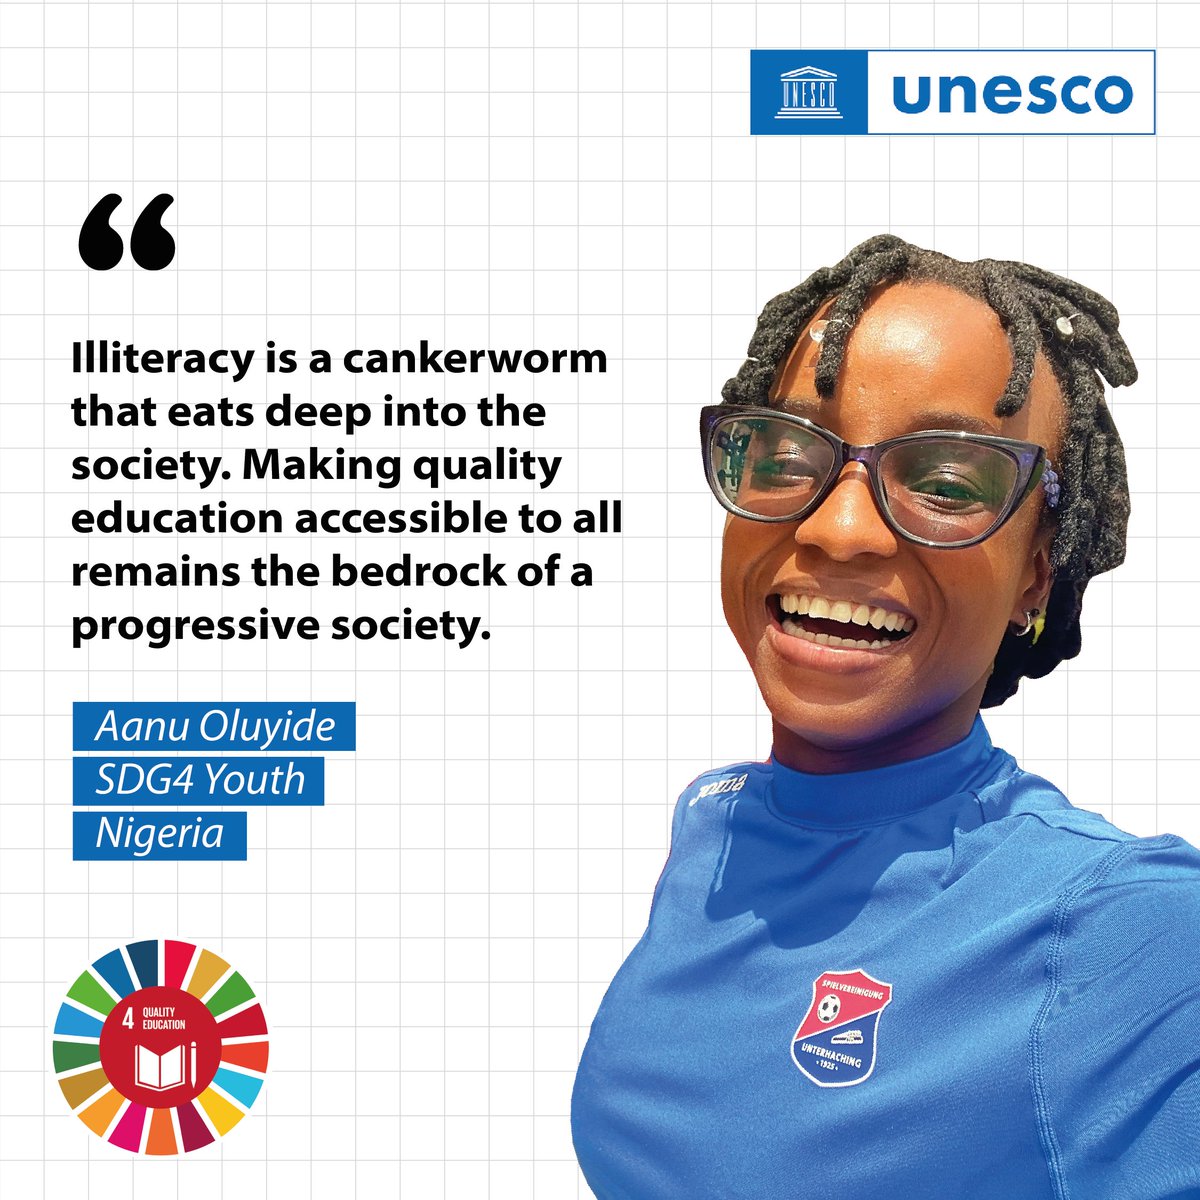 Changing Course, Transforming Education. We all can do it. 
#SDG4Youth #YouthVoicesForEducation #EducationDay #PowerEducation #InternationalEducationDay
#Education2030 

Follow @Education2030UN for more updates.